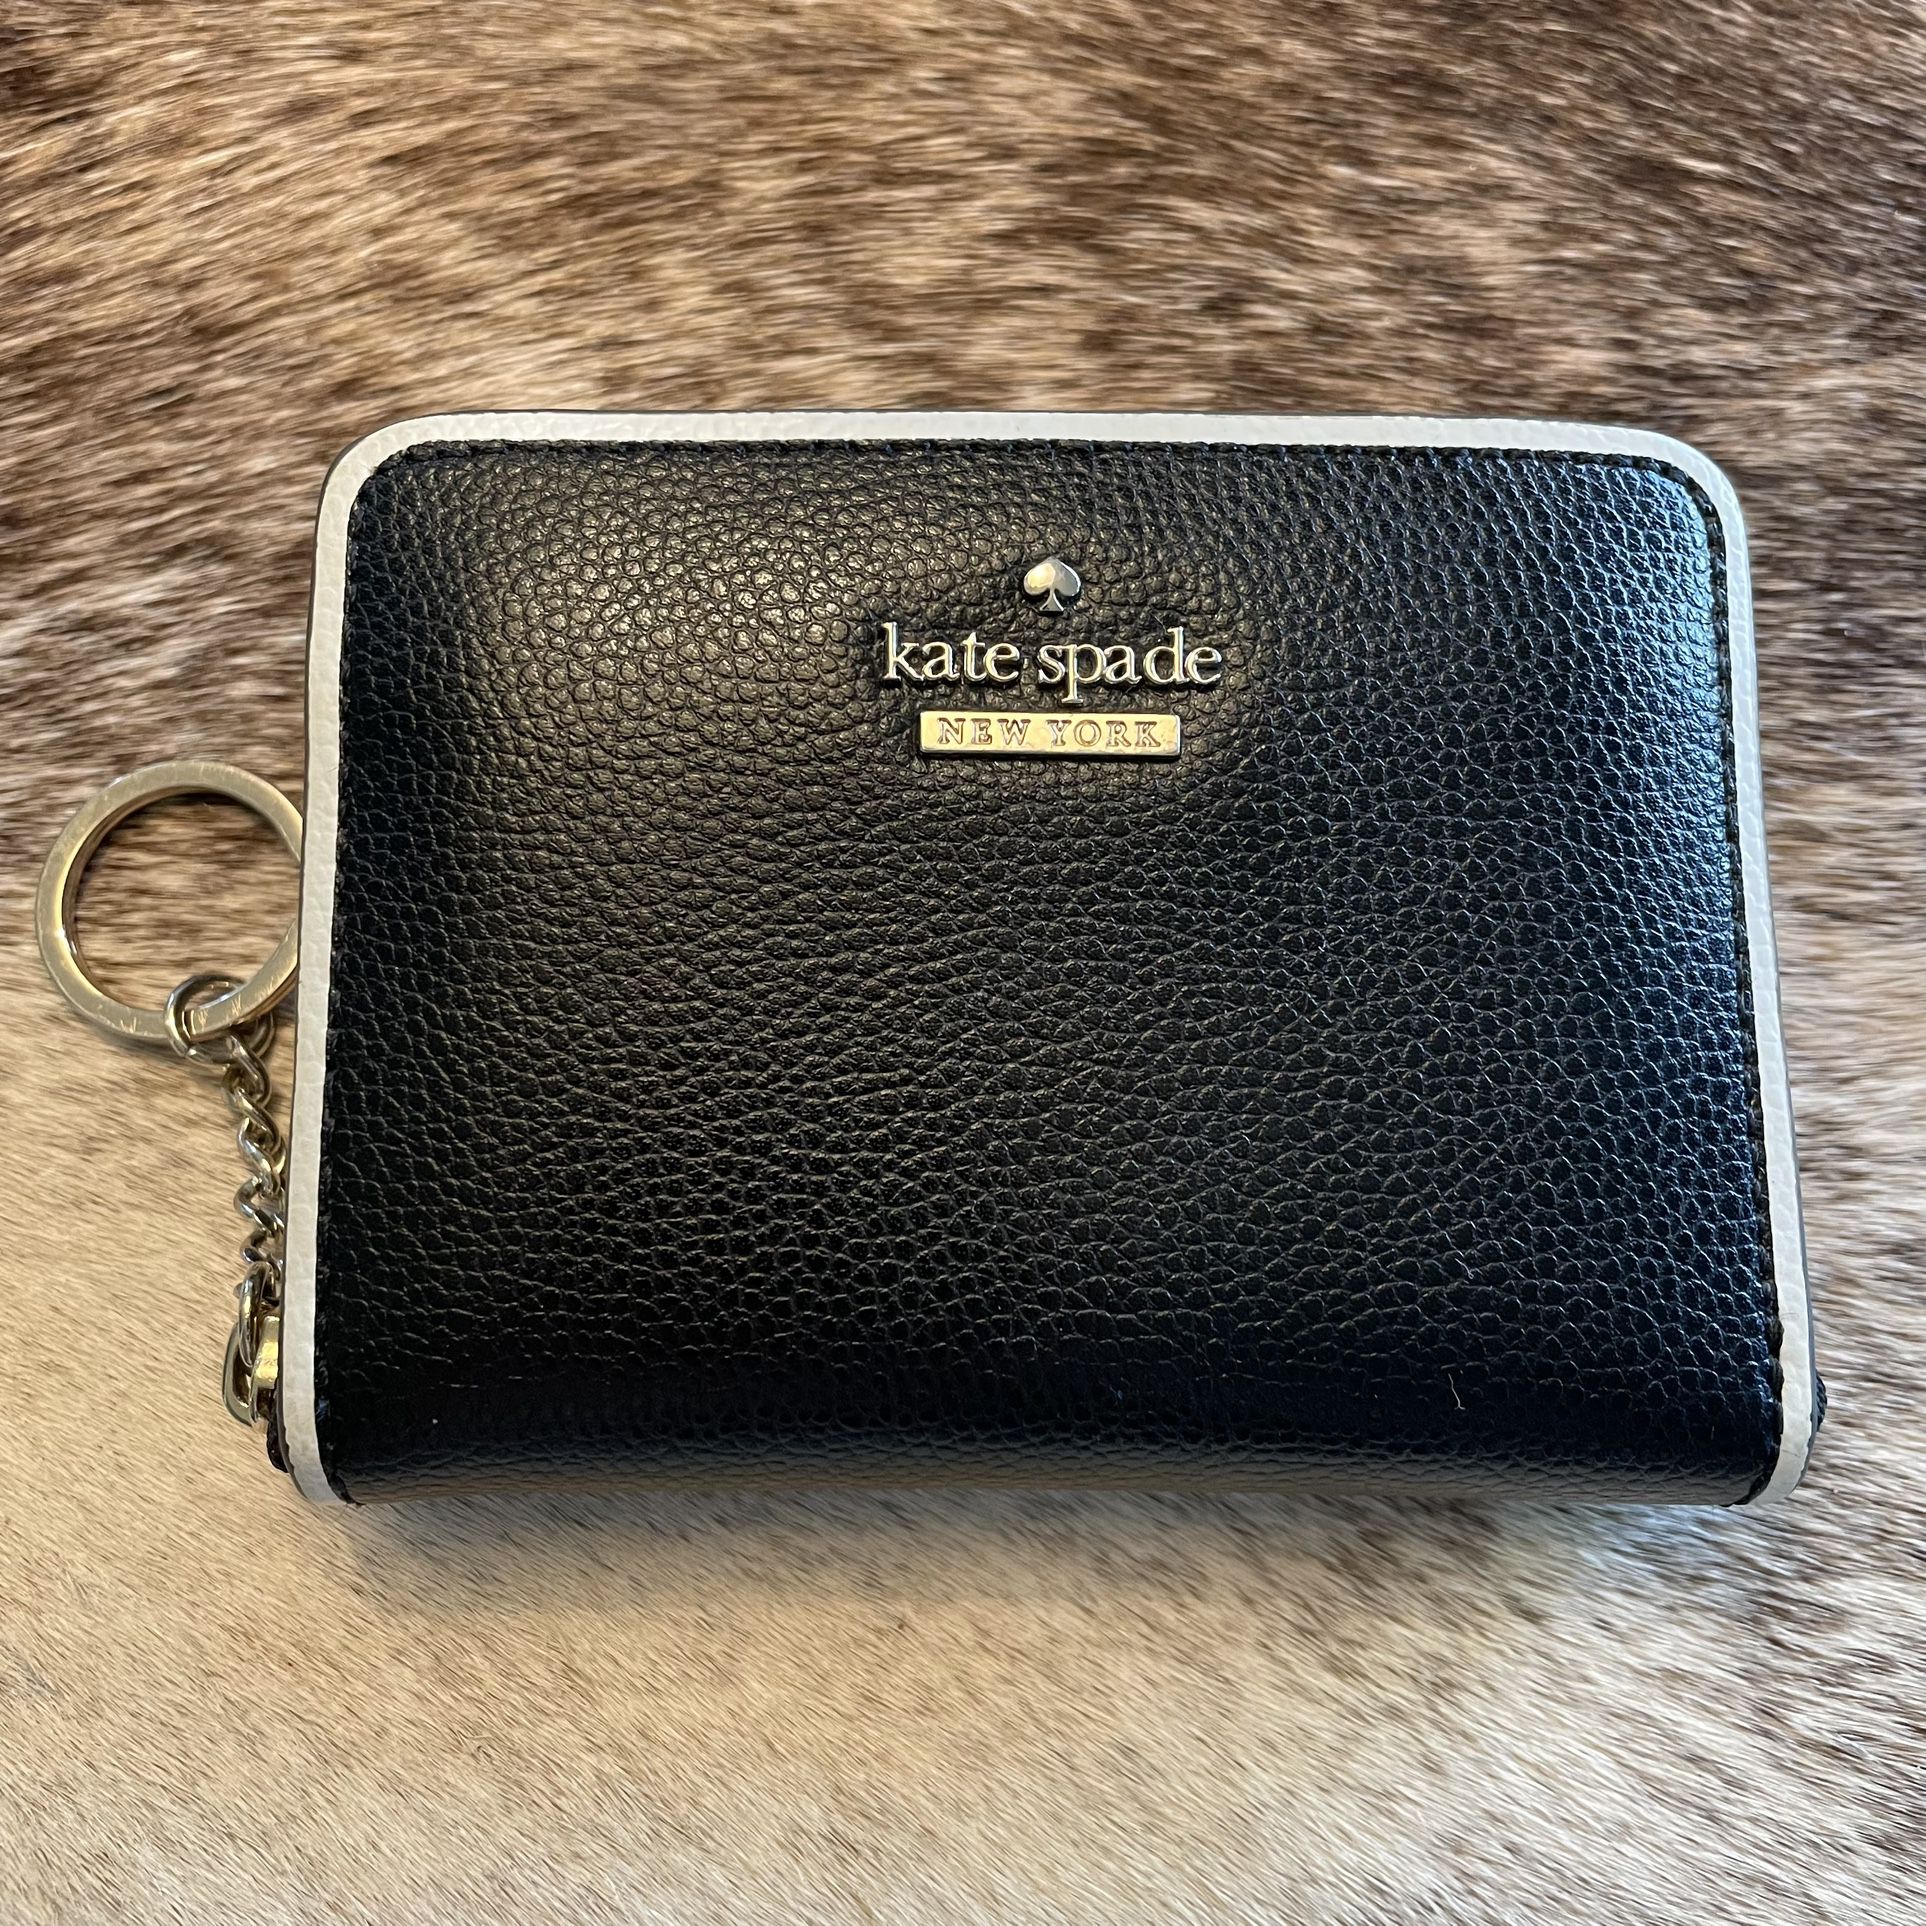 Kate Spade Small Wallet - Black Leather with White Trim